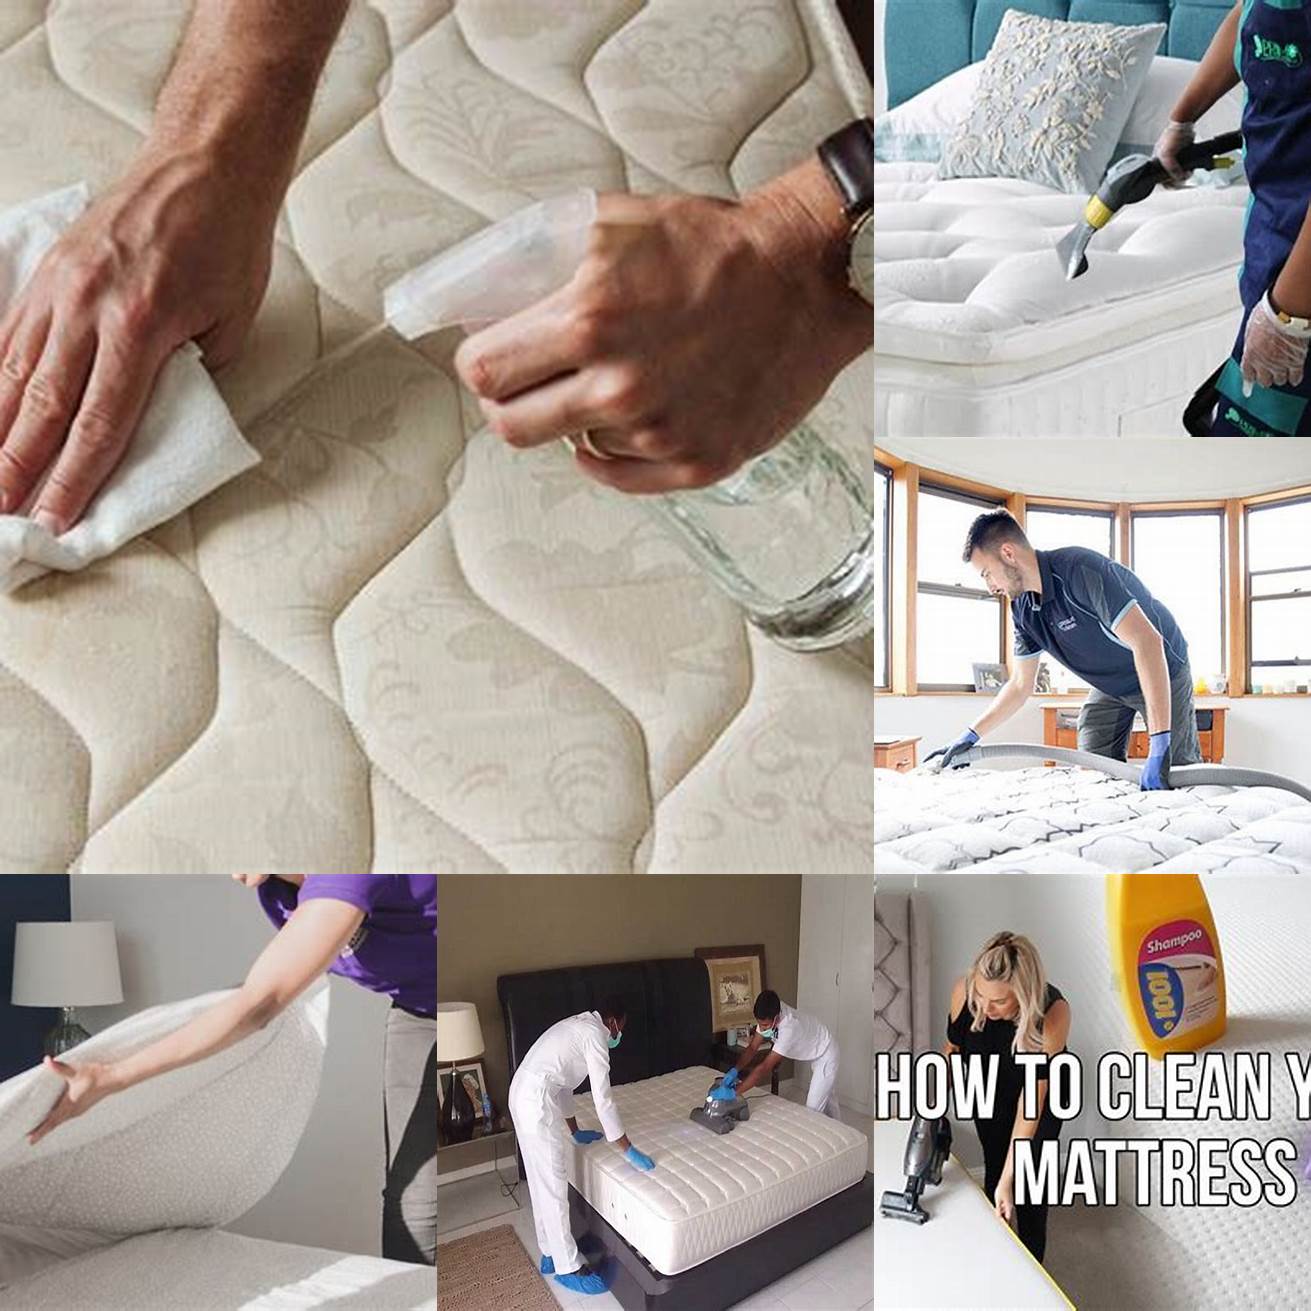 Regularly clean the bed frames and mattresses